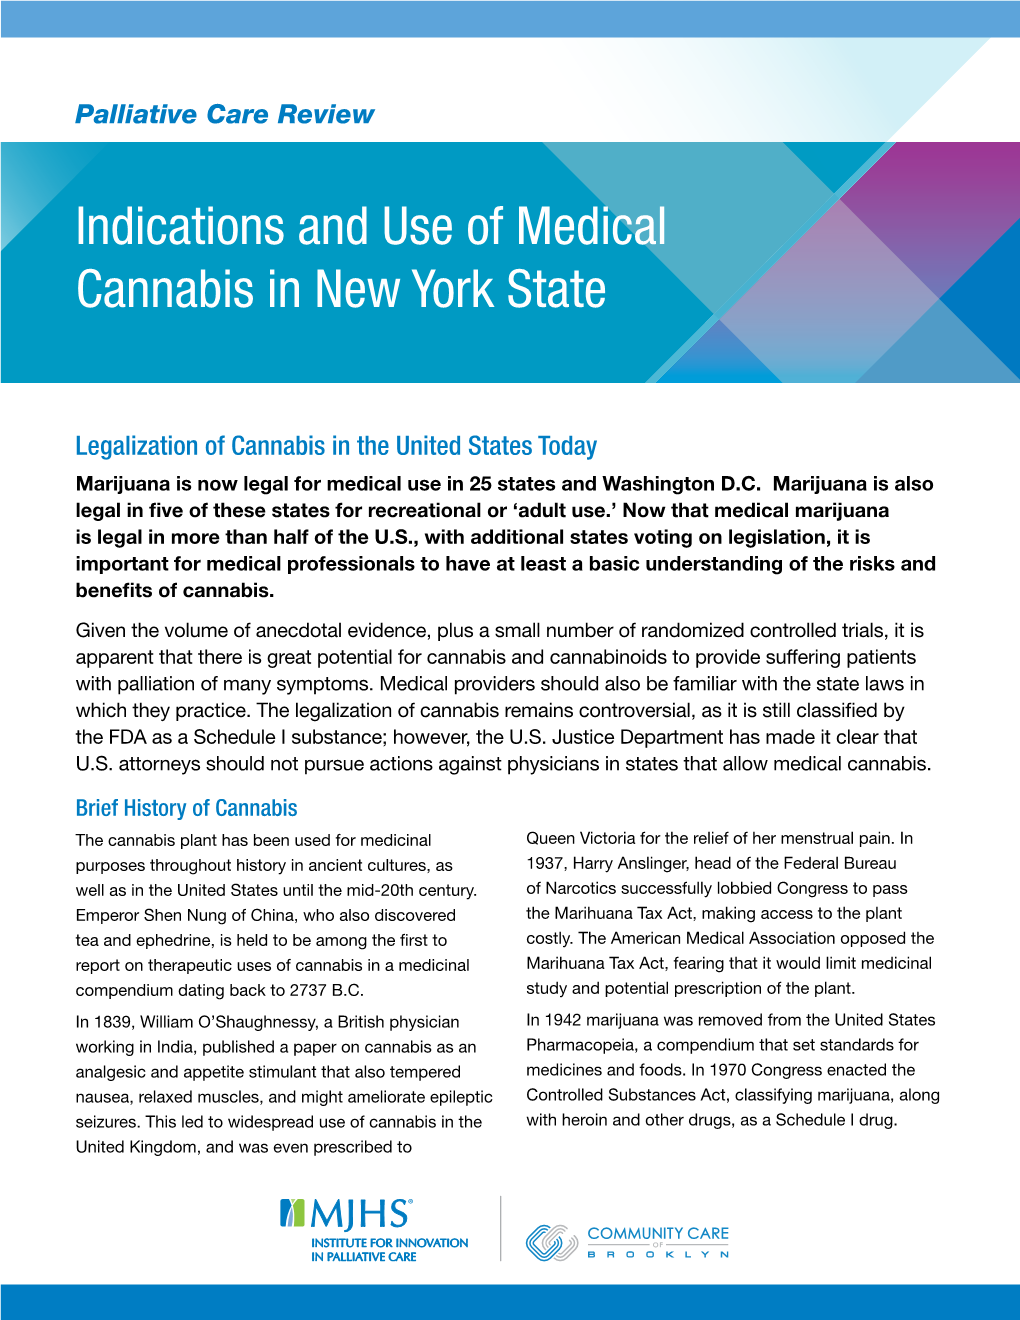 Indications and Use of Medical Cannabis in New York State